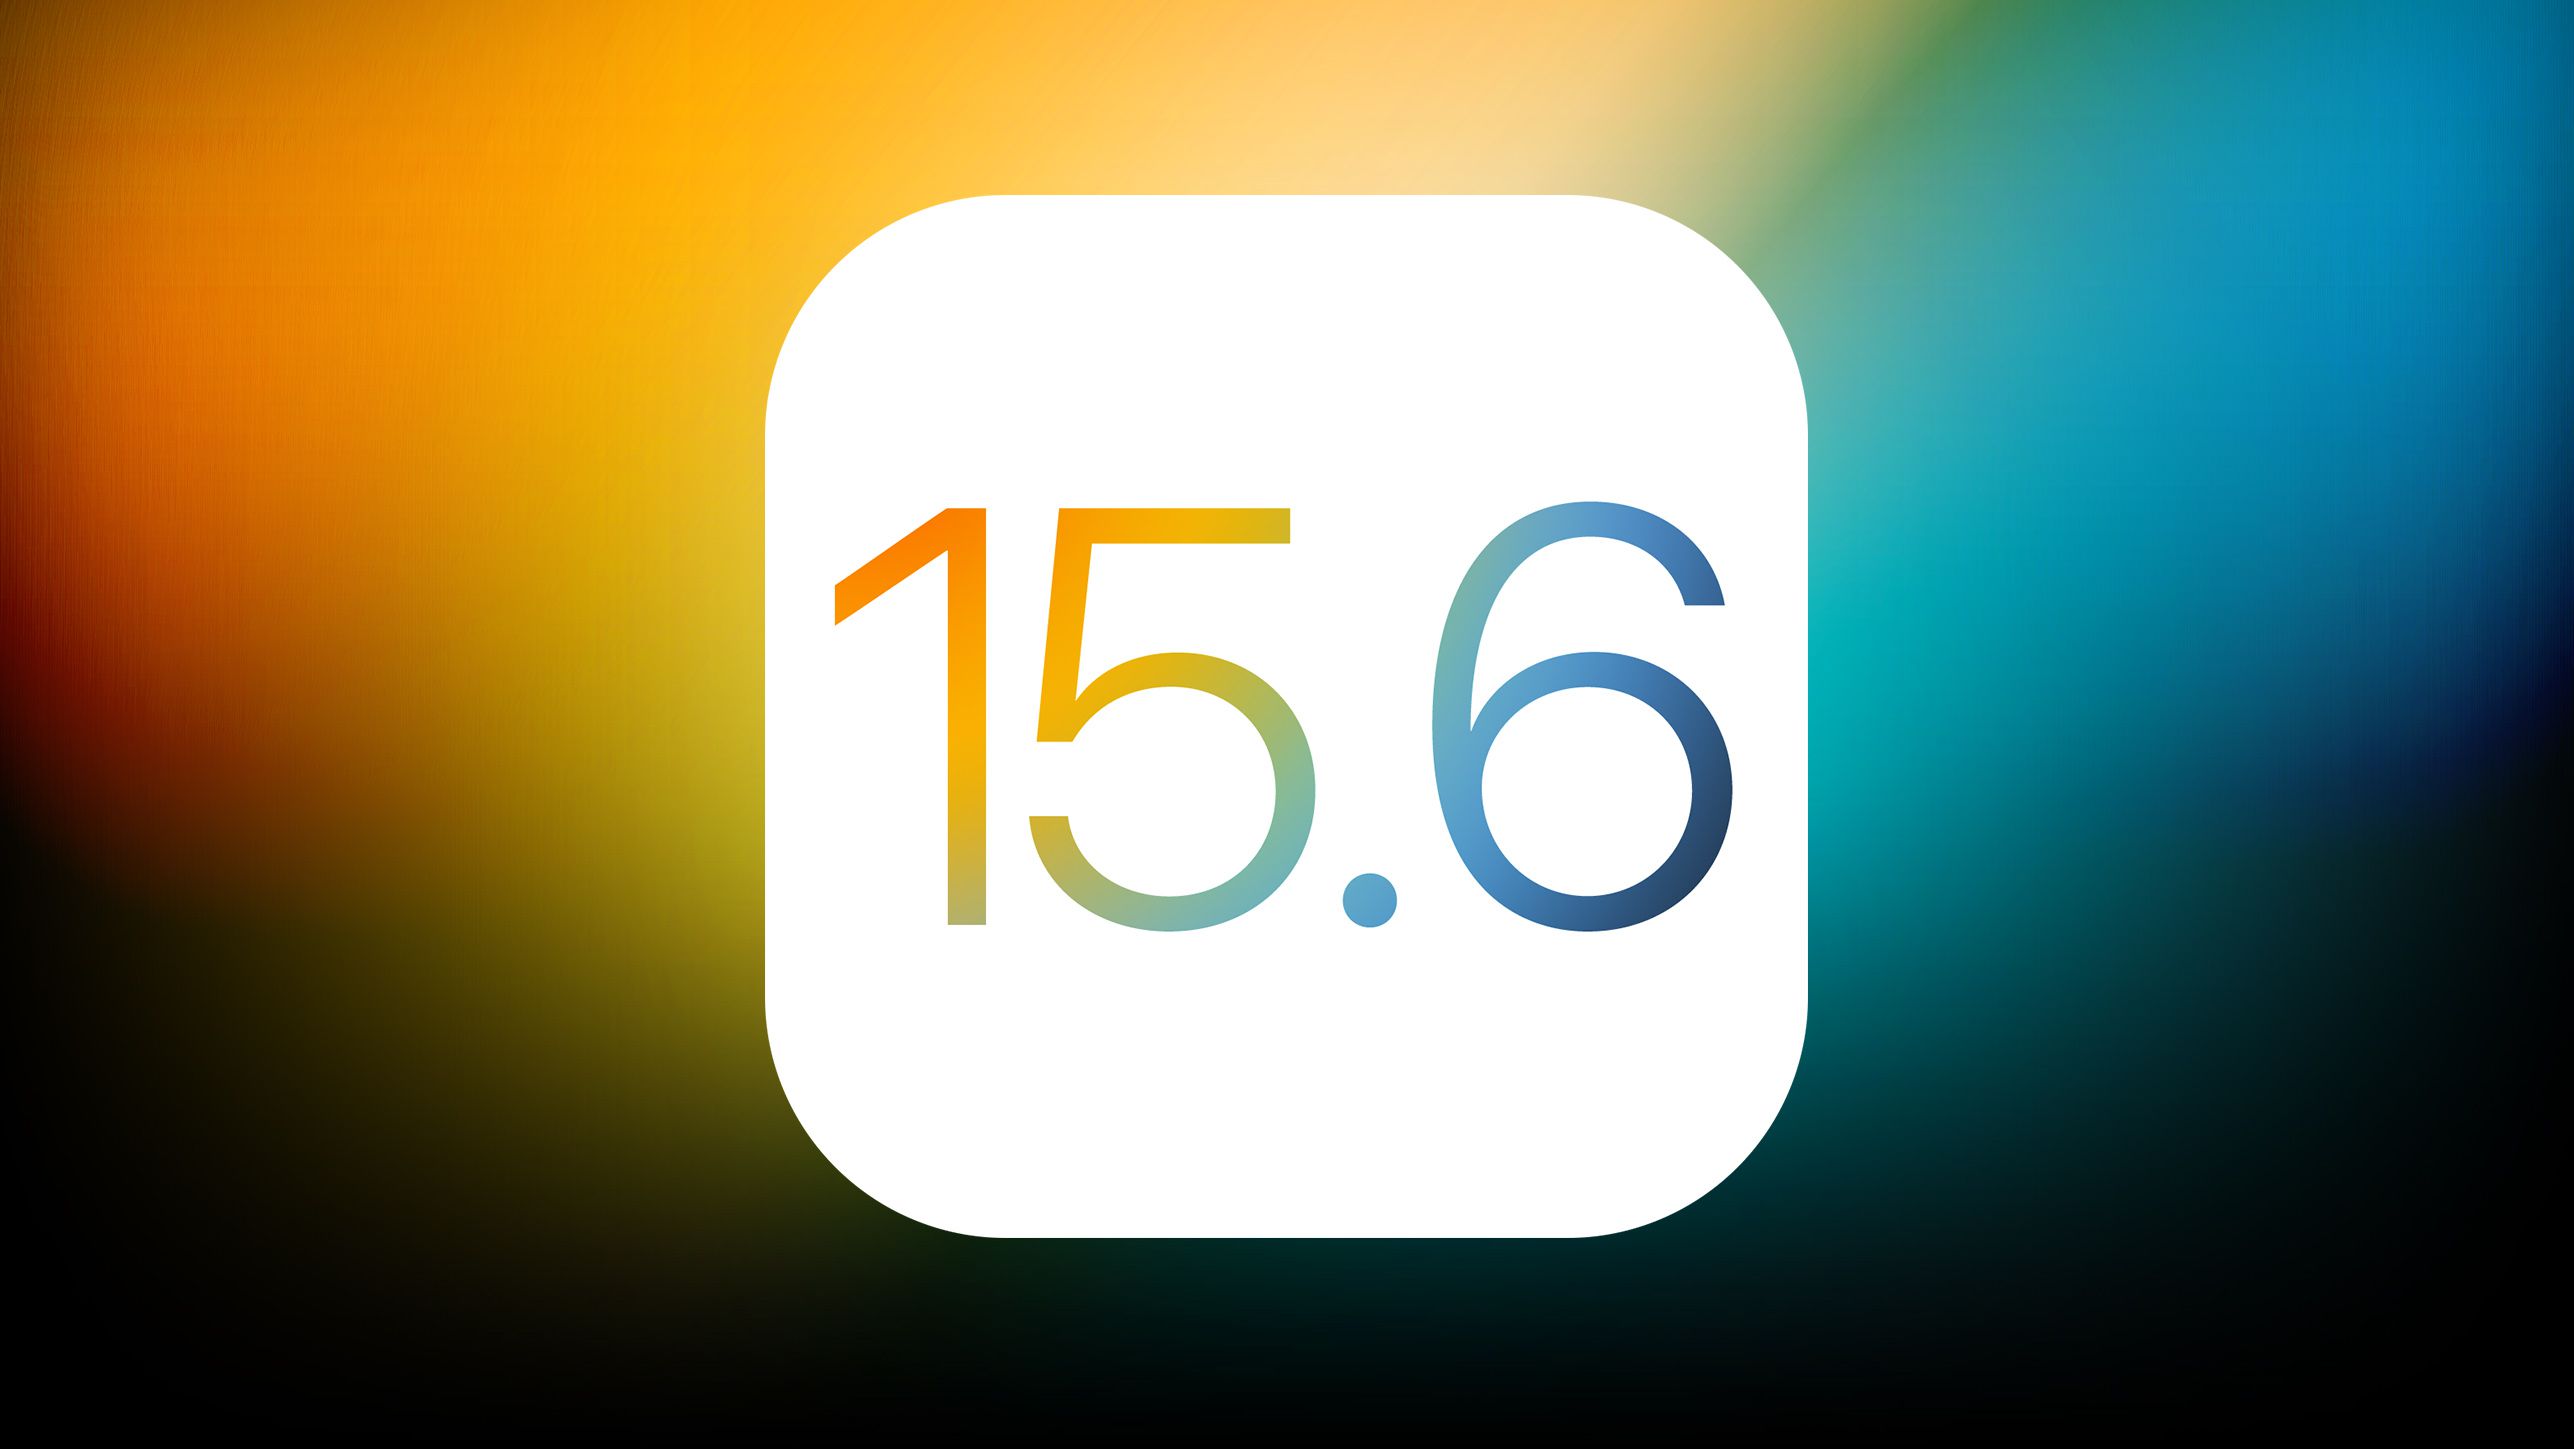 Apple Seeds First Betas of iOS 15.6 and iPadOS 15.6 to Developers - MacRumors